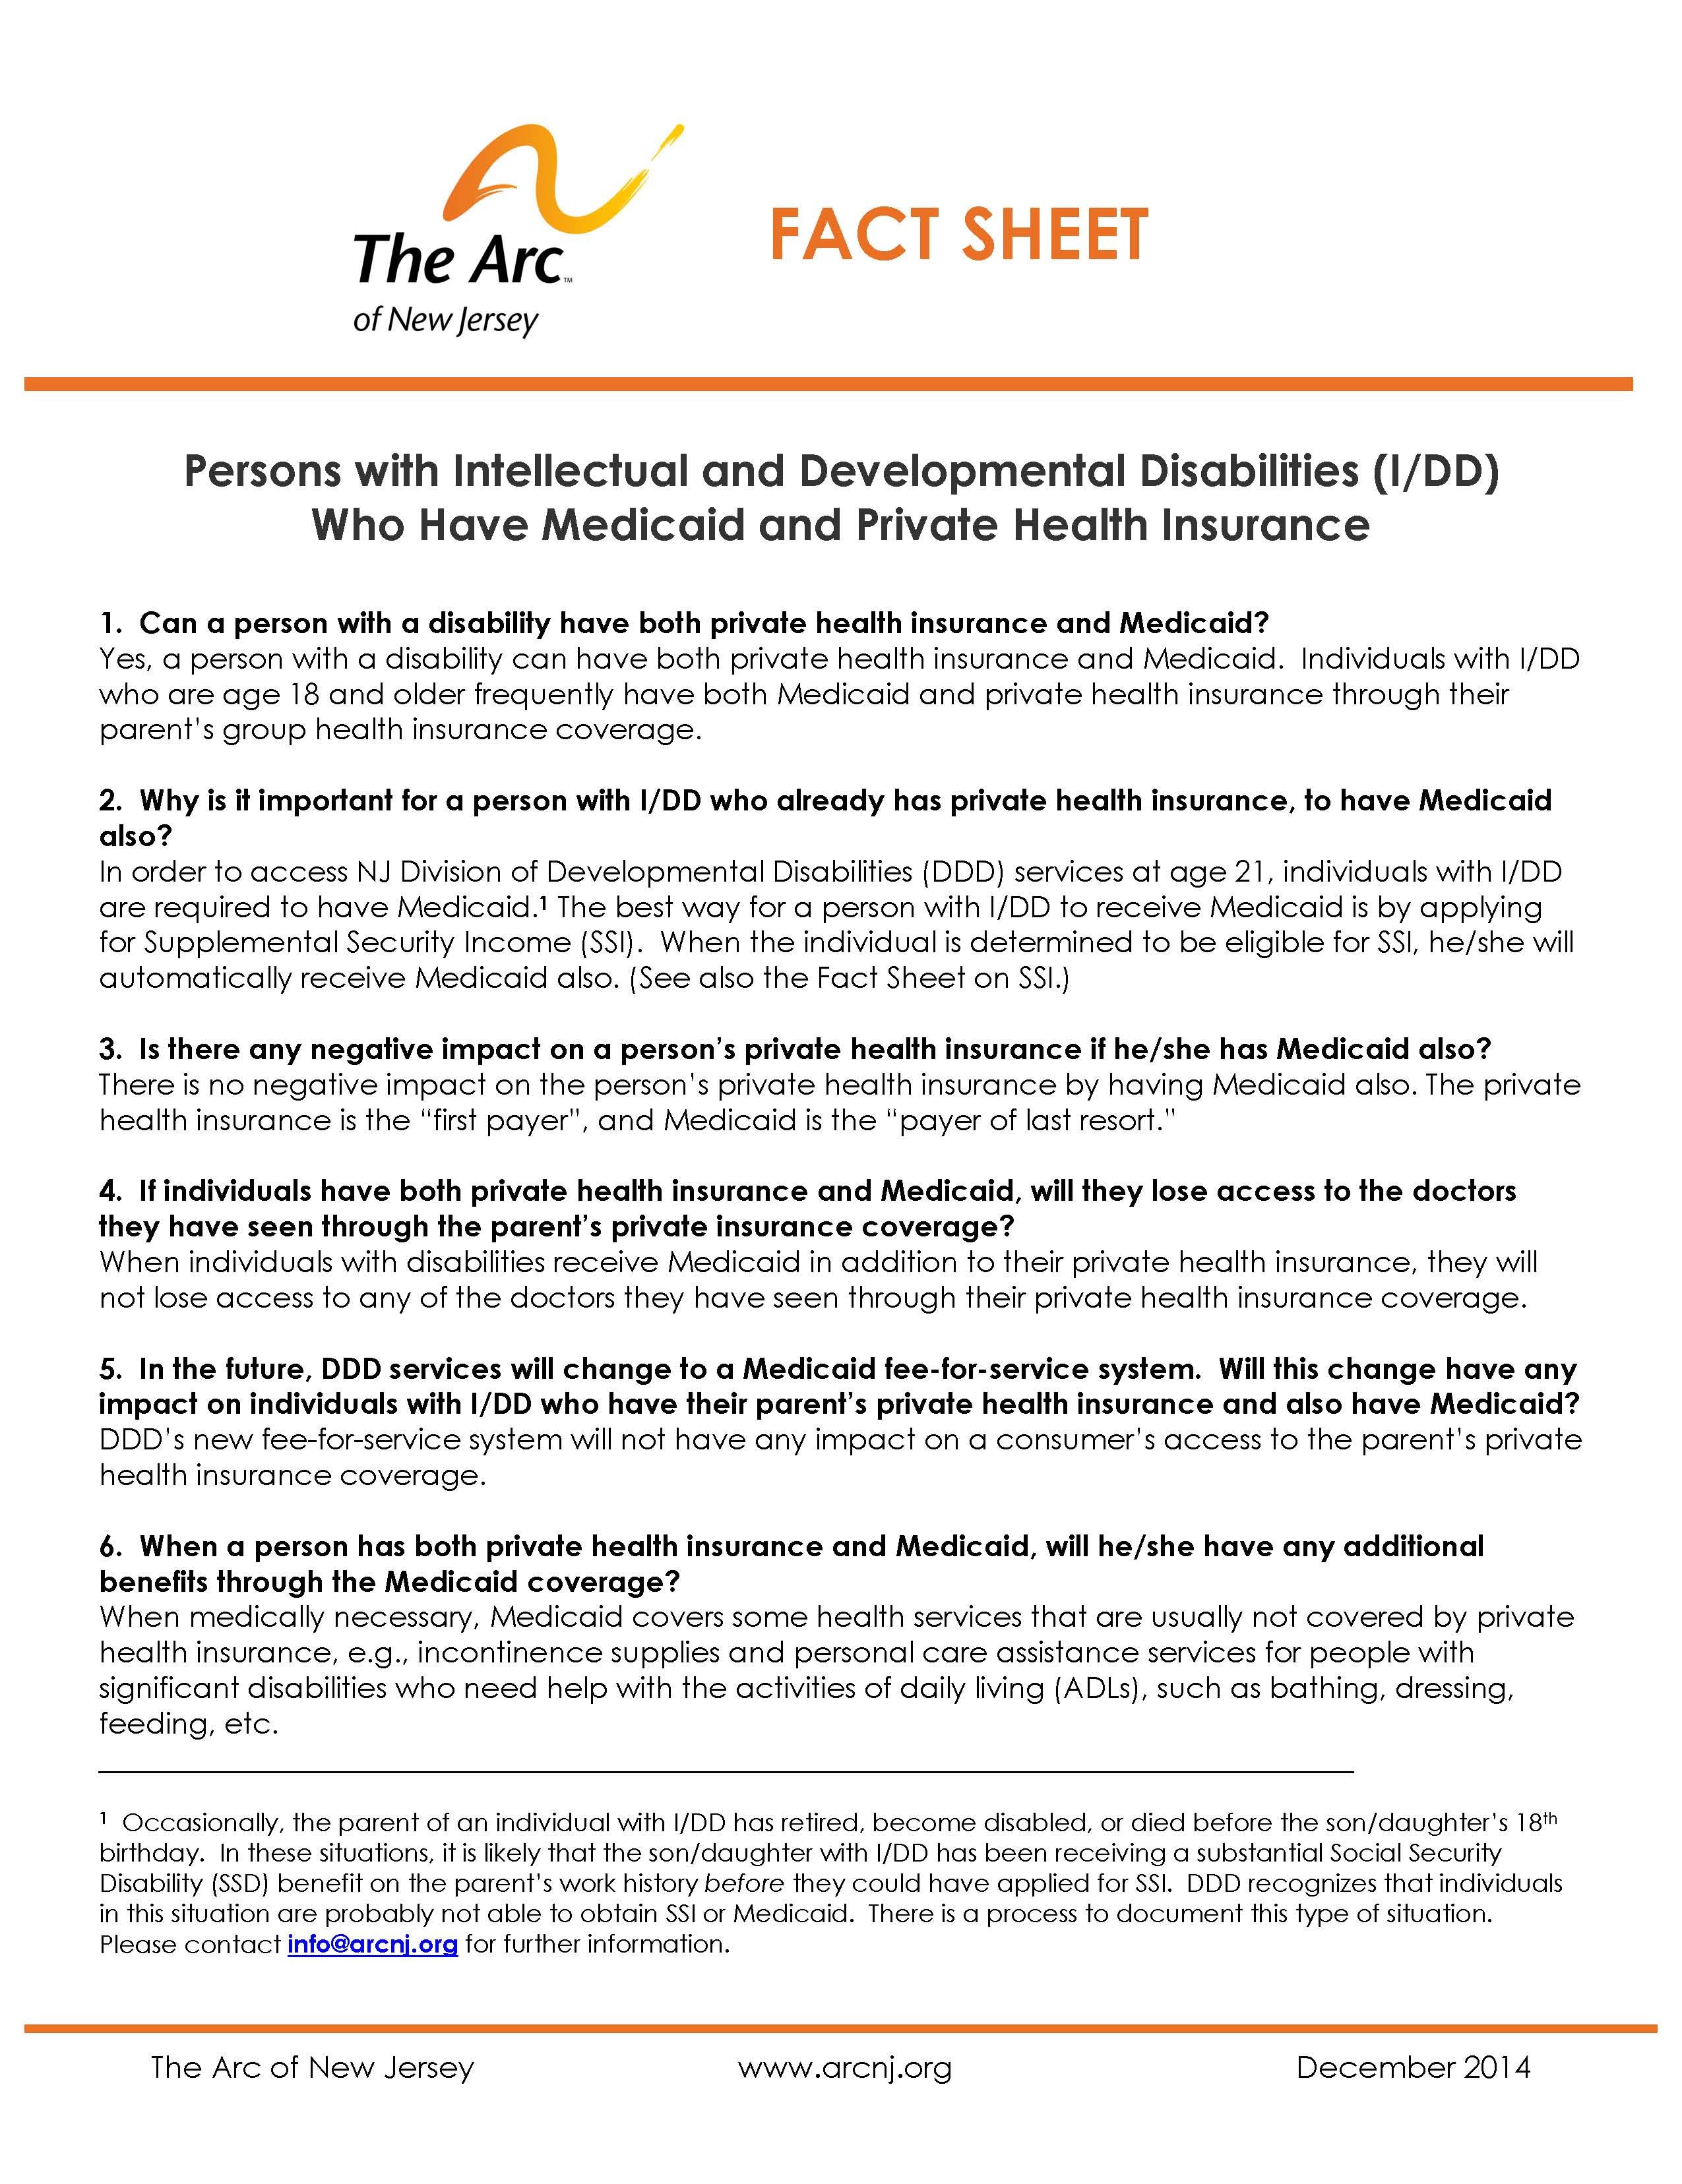 Persons with Intellectual and Developmental Disabilities (IDD) Who Have Medicaid and Private Health Insurance